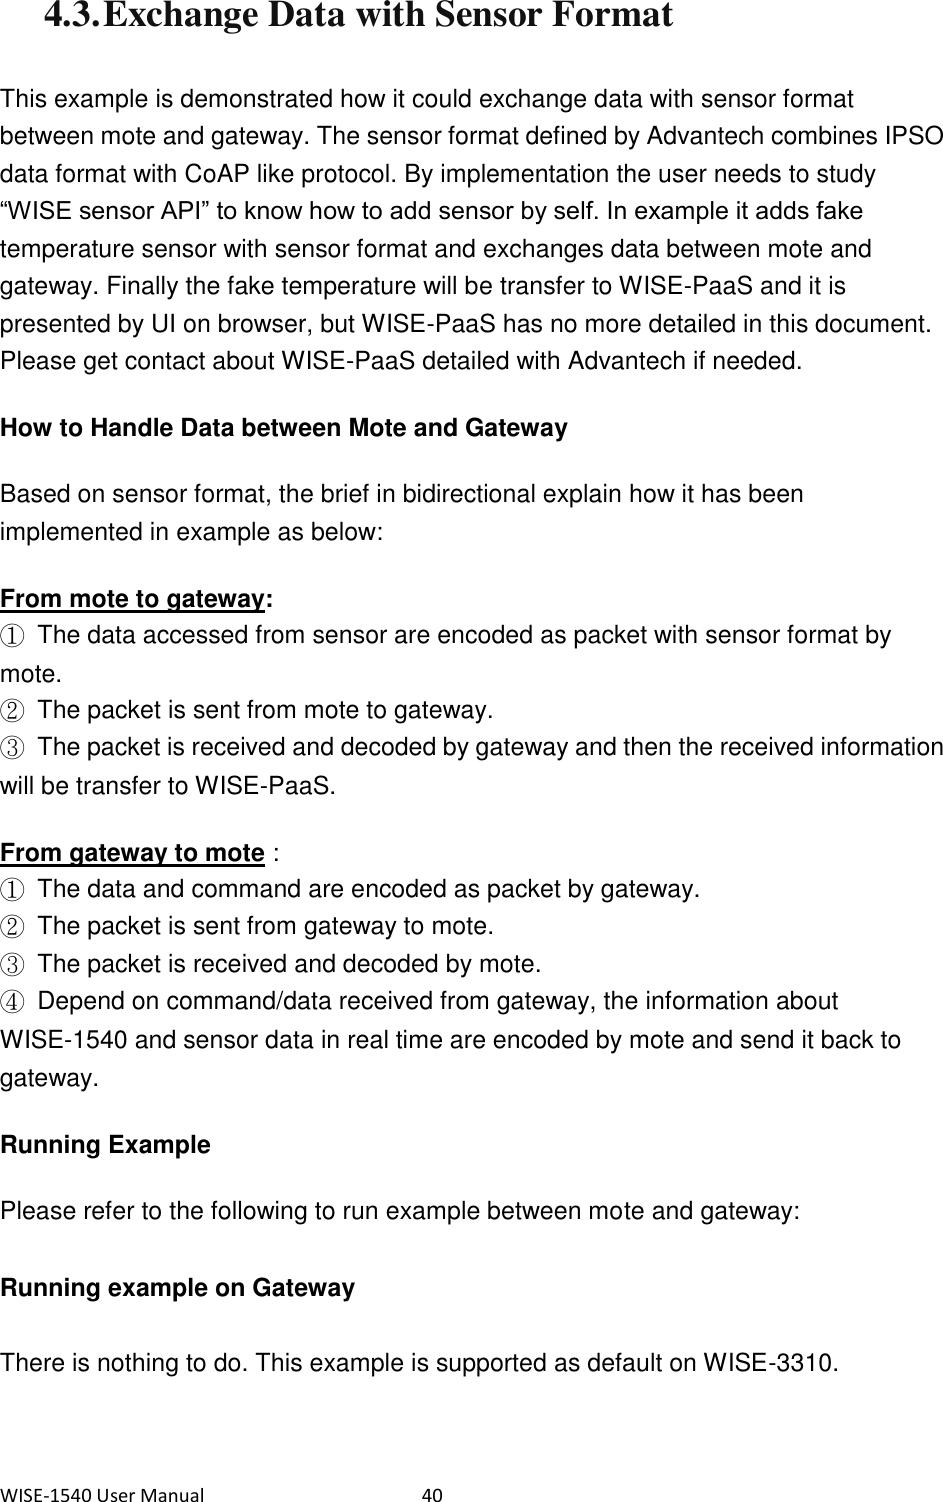 WISE-1540 User Manual  40 4.3. Exchange Data with Sensor Format This example is demonstrated how it could exchange data with sensor format between mote and gateway. The sensor format defined by Advantech combines IPSO data format with CoAP like protocol. By implementation the user needs to study “WISE sensor API” to know how to add sensor by self. In example it adds fake temperature sensor with sensor format and exchanges data between mote and gateway. Finally the fake temperature will be transfer to WISE-PaaS and it is presented by UI on browser, but WISE-PaaS has no more detailed in this document. Please get contact about WISE-PaaS detailed with Advantech if needed.   How to Handle Data between Mote and Gateway Based on sensor format, the brief in bidirectional explain how it has been implemented in example as below:   From mote to gateway:   ①  The data accessed from sensor are encoded as packet with sensor format by mote. ②  The packet is sent from mote to gateway. ③  The packet is received and decoded by gateway and then the received information will be transfer to WISE-PaaS.   From gateway to mote : ①  The data and command are encoded as packet by gateway. ②  The packet is sent from gateway to mote. ③  The packet is received and decoded by mote. ④  Depend on command/data received from gateway, the information about WISE-1540 and sensor data in real time are encoded by mote and send it back to gateway.   Running Example Please refer to the following to run example between mote and gateway:   Running example on Gateway There is nothing to do. This example is supported as default on WISE-3310.   